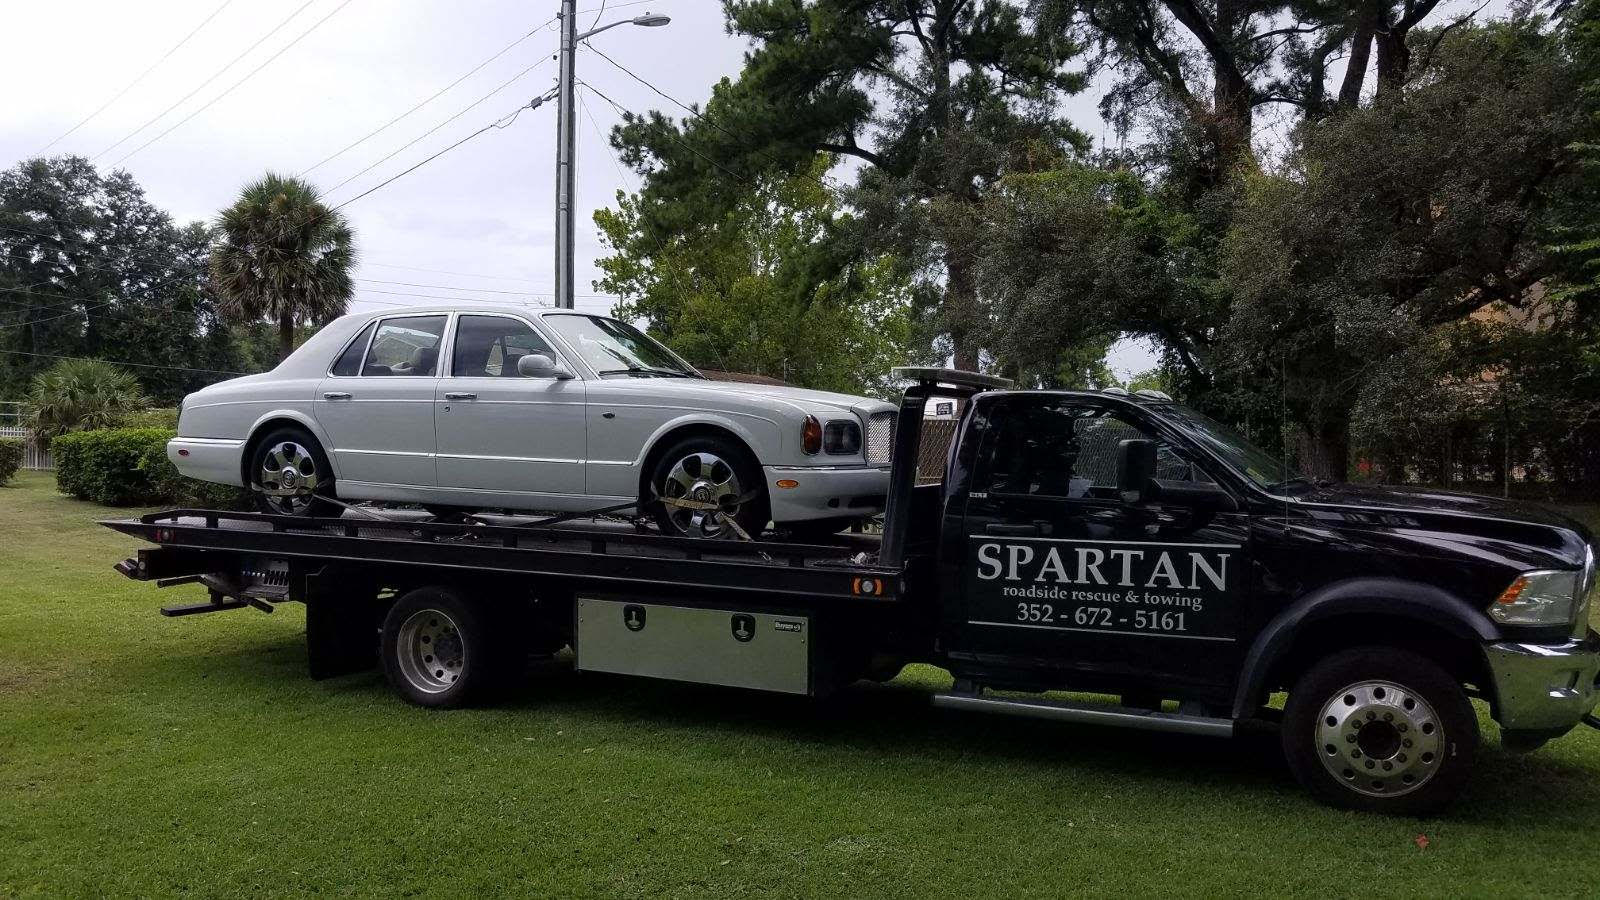 Spartan Towing Inc | (352) 672-5161 | Gainesville, FL | Light Duty Towing | Flatbed Towing | Wrecker Towing | Box Truck Towing | Dually Towing | Motorcycle Towing | Limousine Towing | Classic Car Towing | Luxury Car Towing | Sports Car Towing | Exotic Car Towing | Long Distance Towing | Tipsy Towing | Junk Car Removal | Winching & Extraction | Equipment Transportation | Moving Forklifts | Scissor Lifts Movers | Boom Lifts Movers | Roadside Assistance | Lockouts | Fuel Delivery | Jump Starts | Tire Service | Auto Transports | Mobile Mechanic